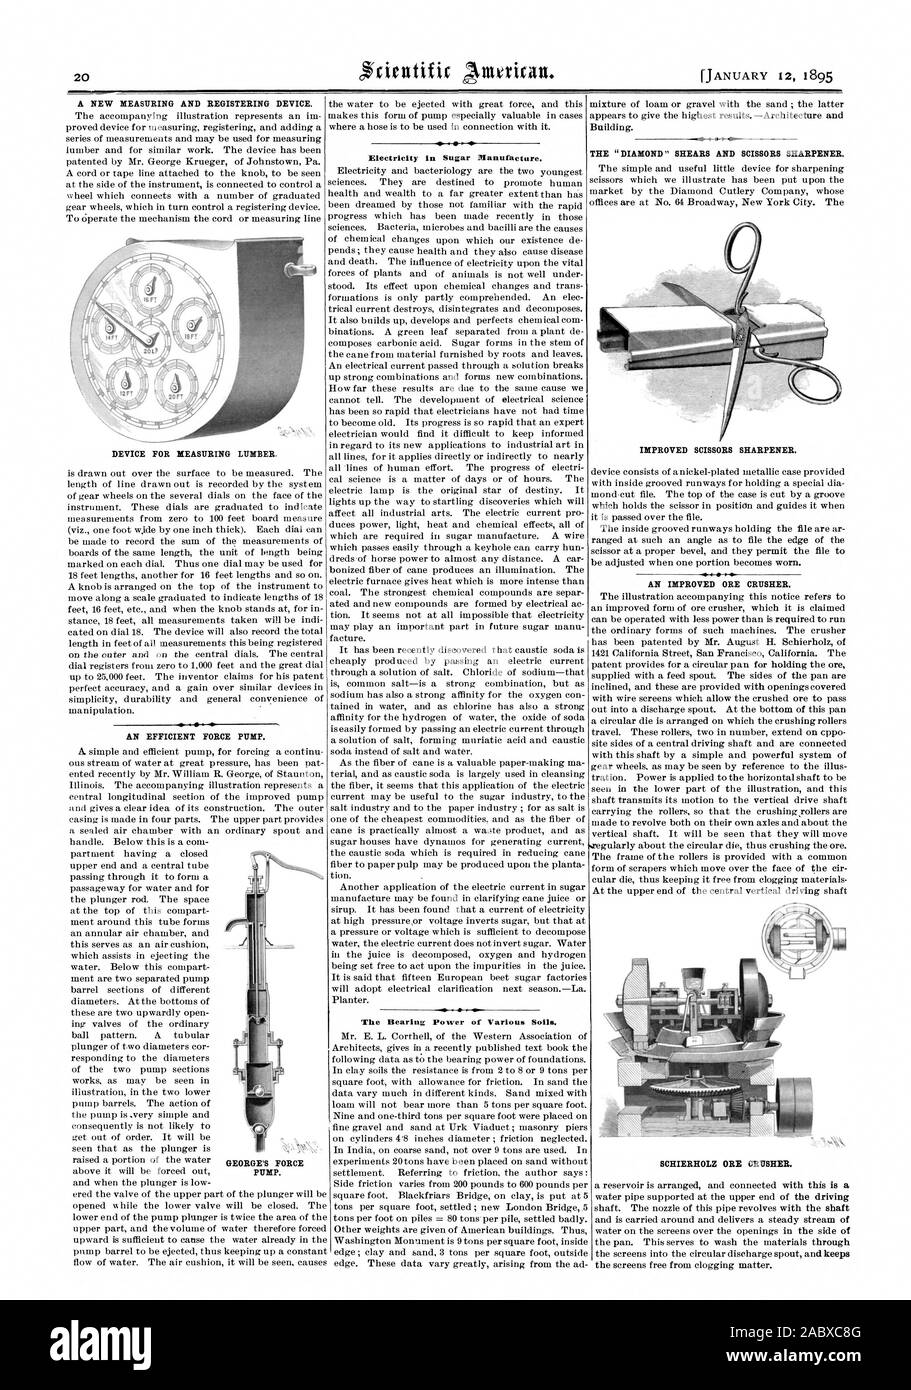 A NEW MEASURING AND REGISTERING DEVICE. DEVICE FOR MEASURING LUMBER. AN EFFICIENT FORCE PUMP. The Bearing Power of Various Soils. Building. Me 4  THE ' DIAMOND ' SHEARS AND SCISSORS SHARPENER. IMPROVED SCISSORS SHARPENER. AN IMPROVED ORE CRUSHER. SCHIERHOLZ ORE CRUSHER., scientific american, 1895-01-12 Stock Photo